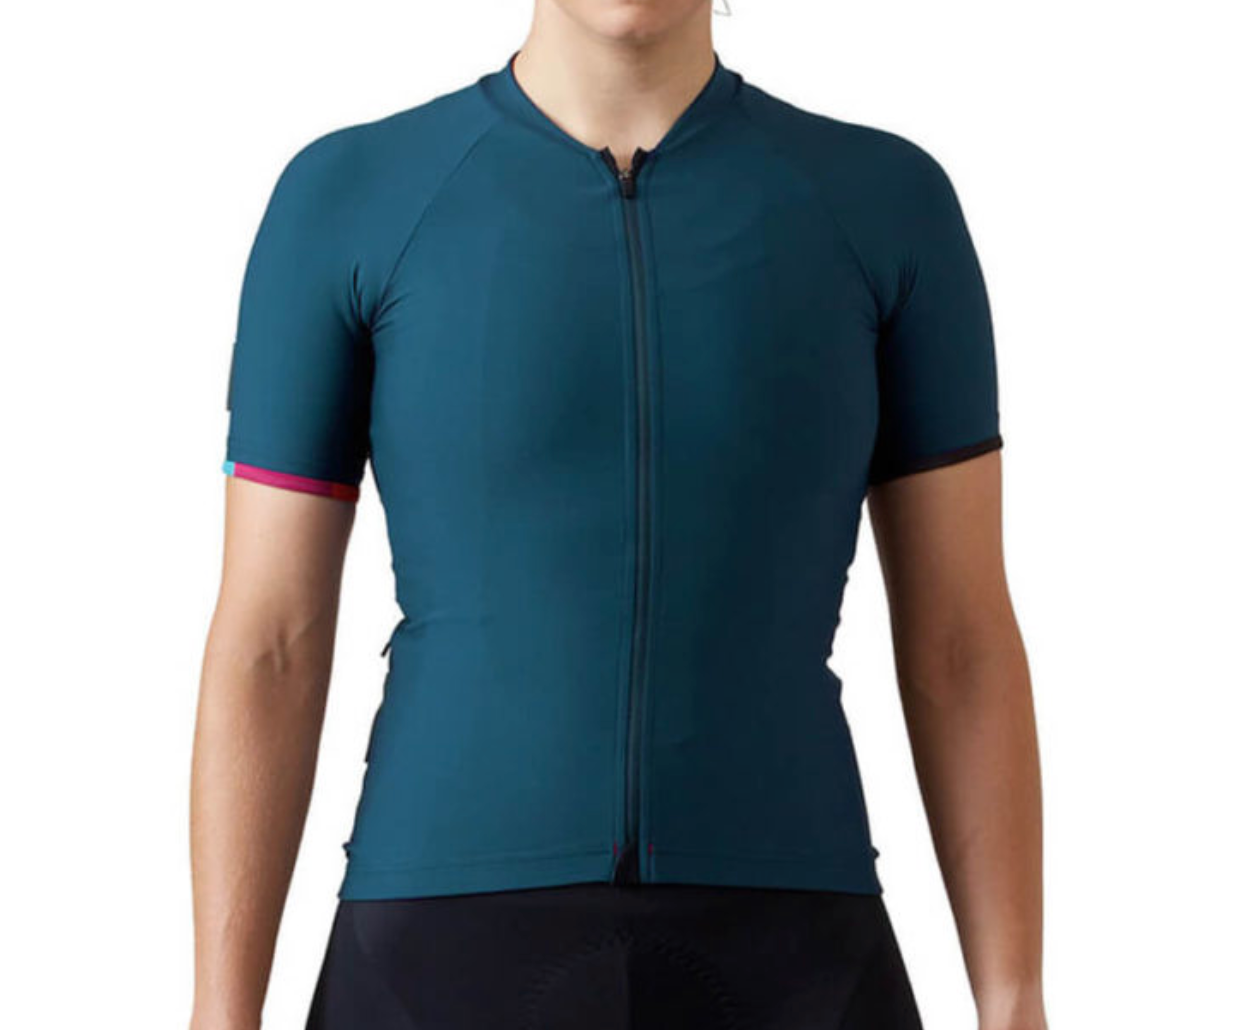 Relaxed Fit Signature Jersey (Women's)